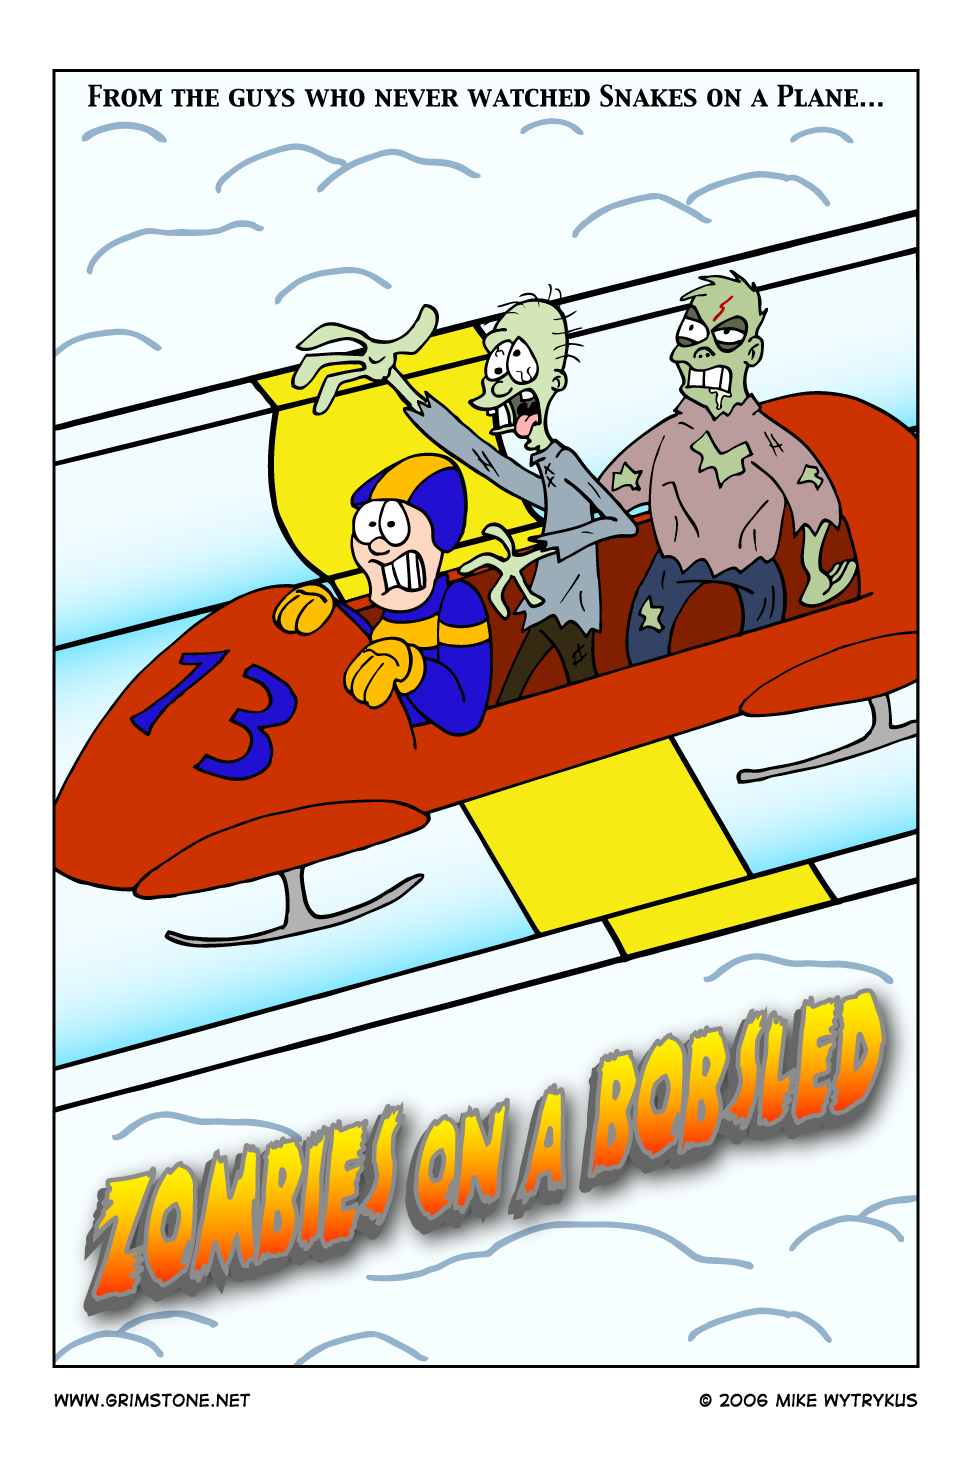 Zombies on a Bobsled